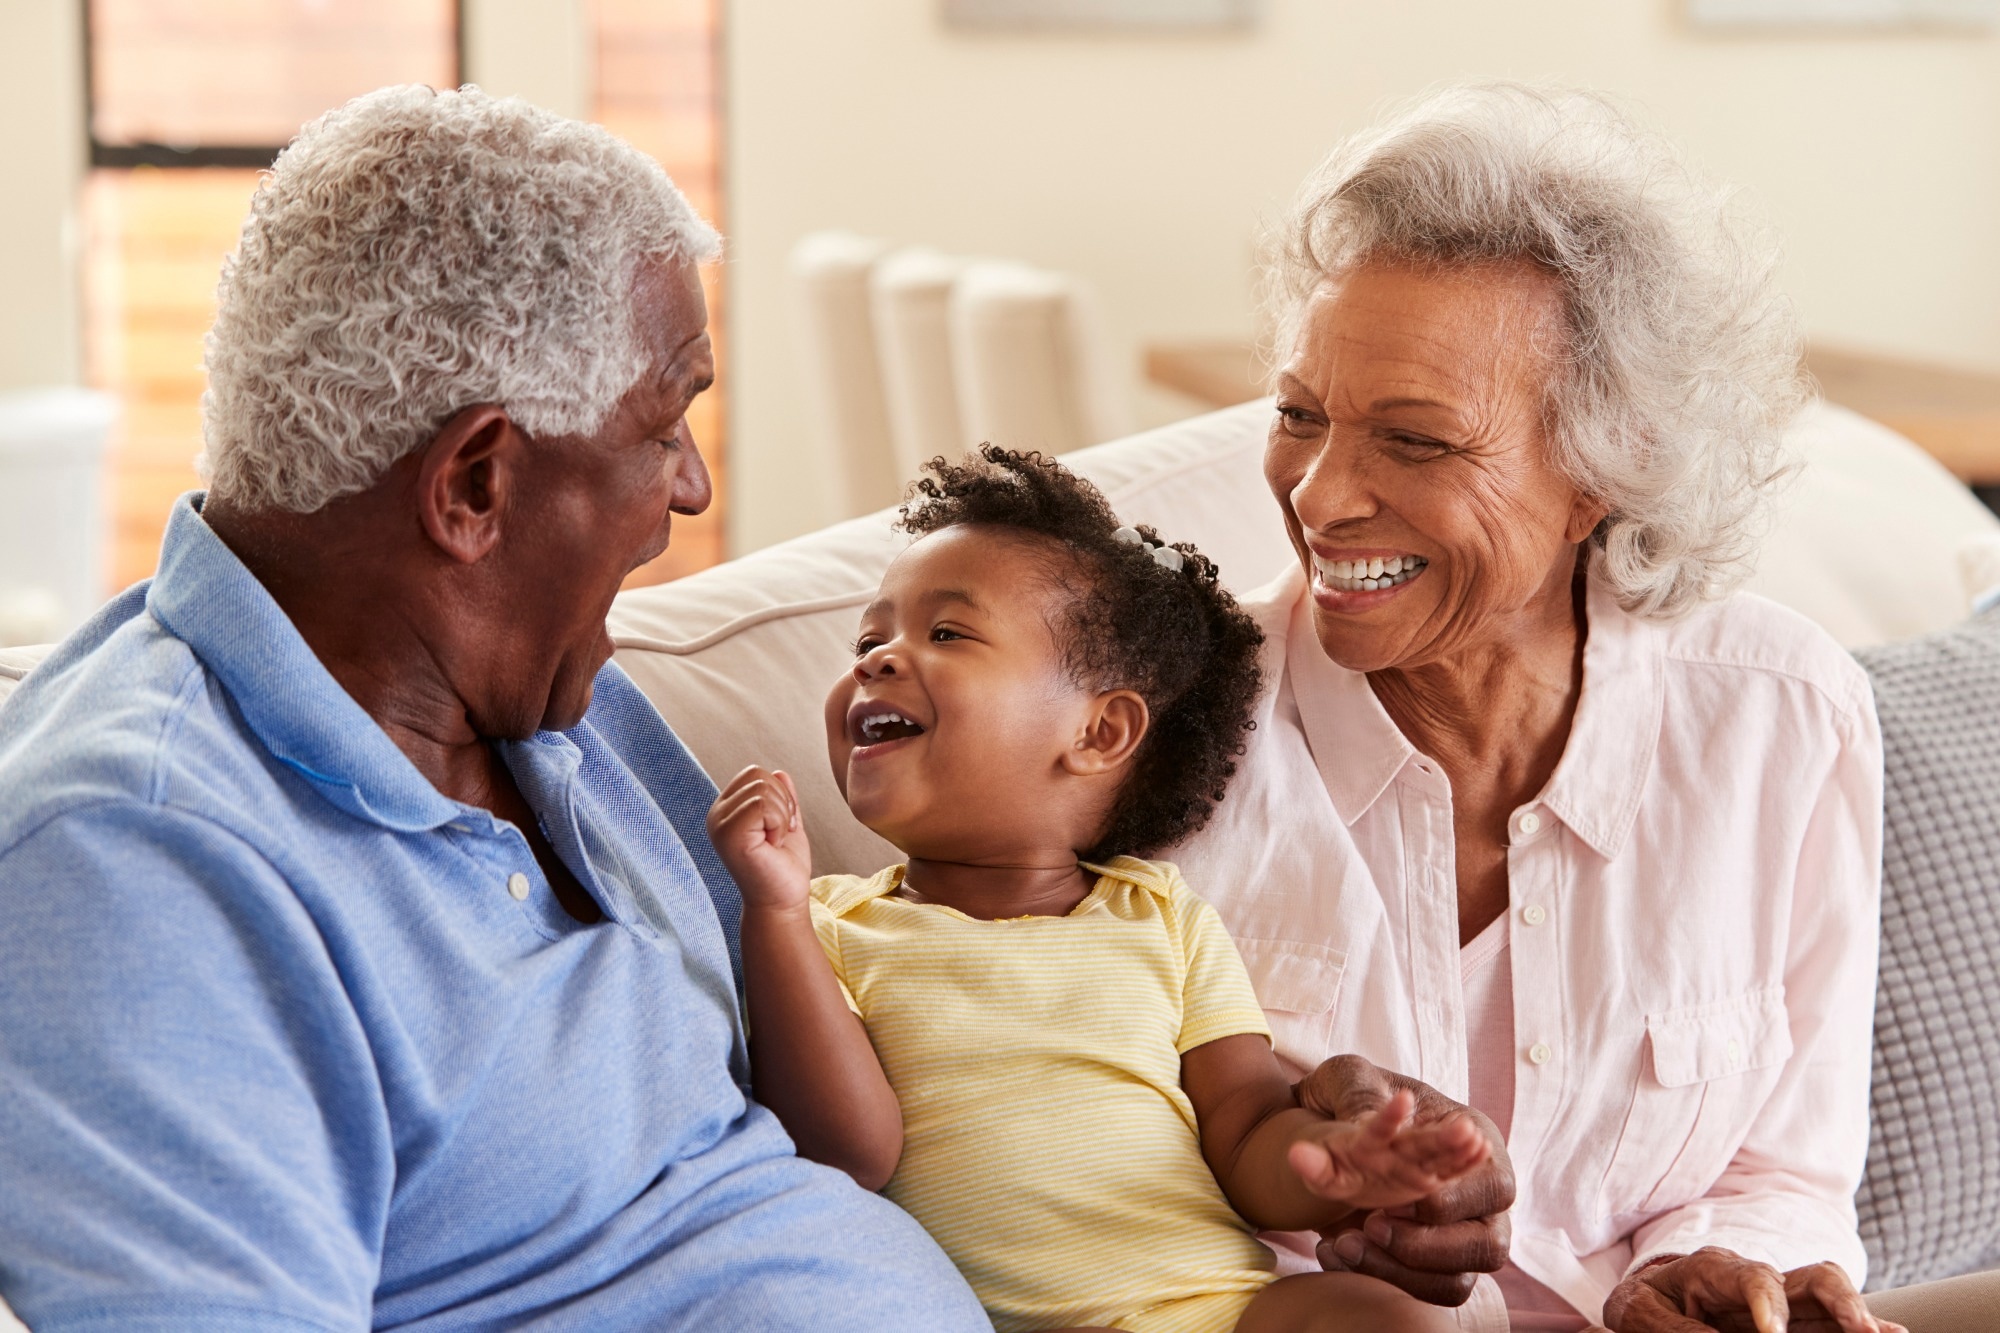 Study: Grandparental support and maternal depression: Do grandparents’ characteristics matter more for separating mothers? Image Credit: Monkey Business Images/Shutterstock.com